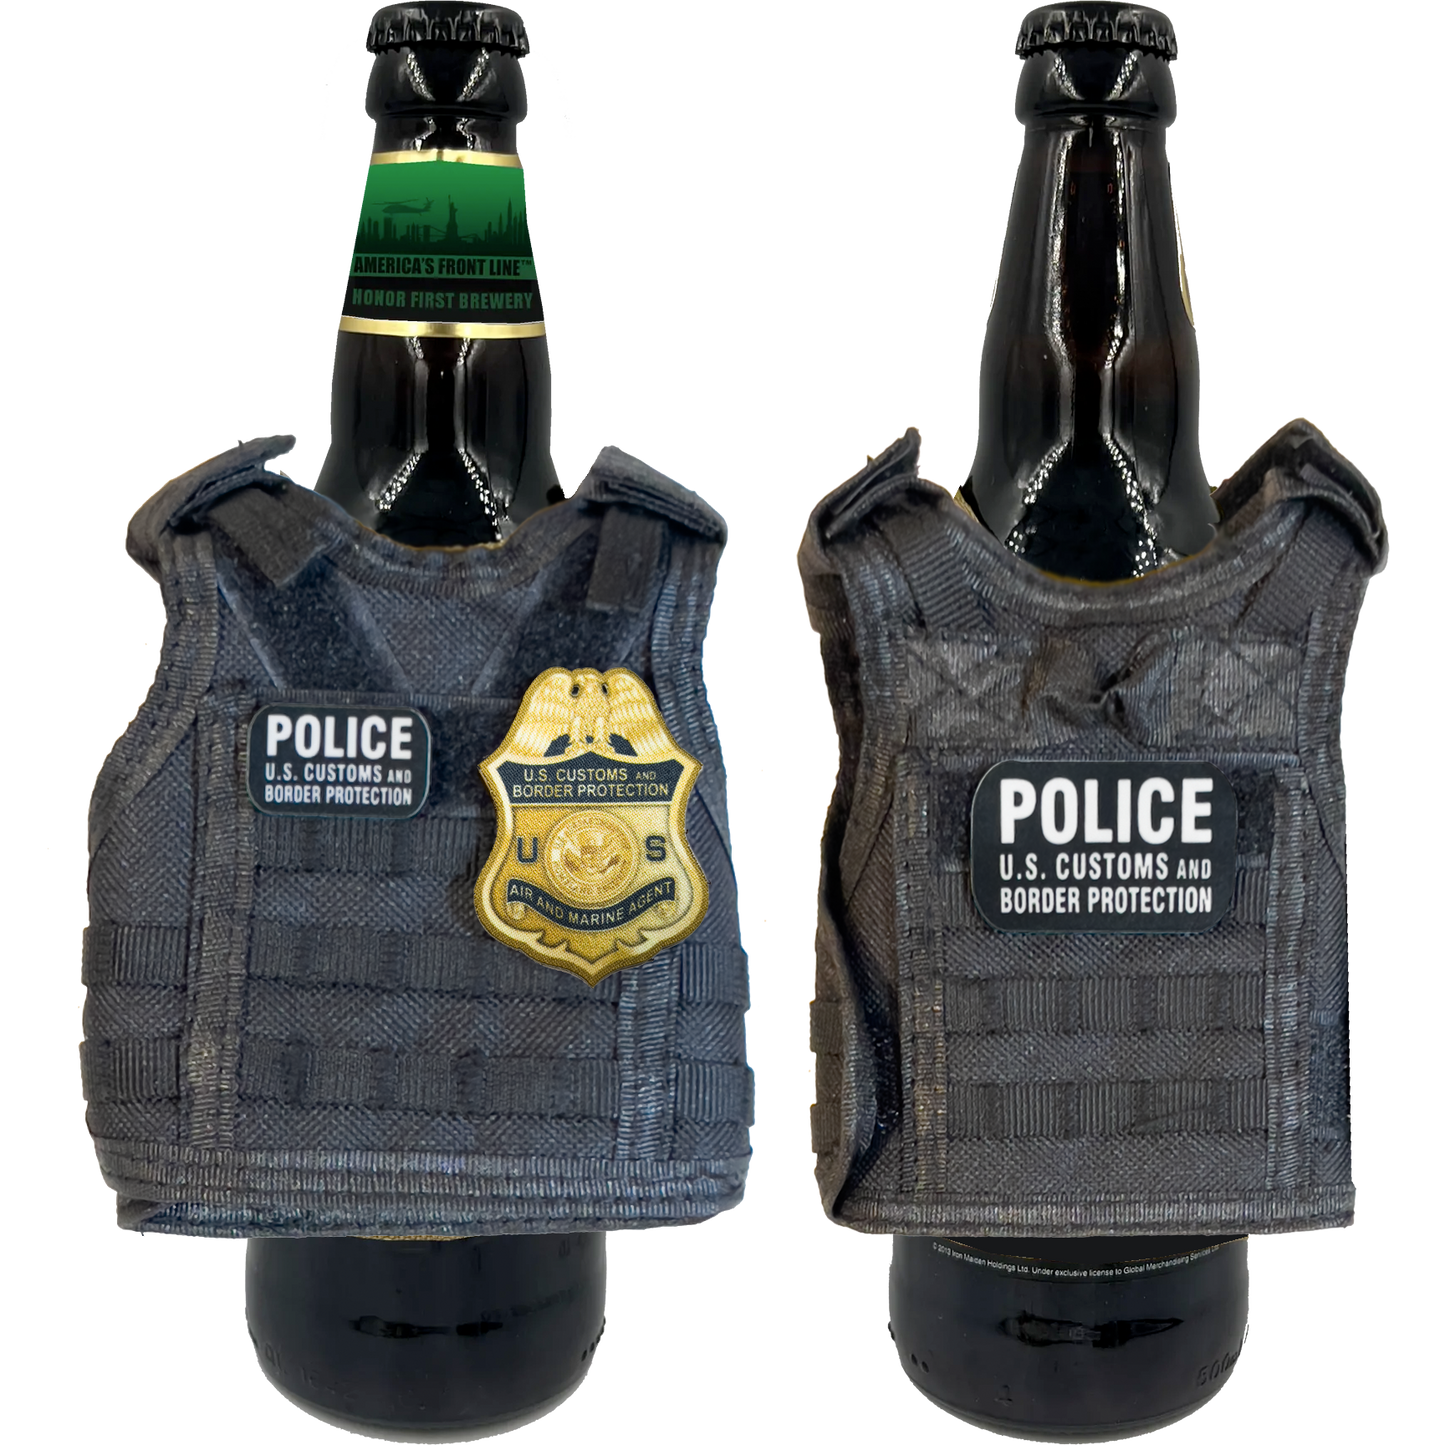 GB2-003 CBP AMO Air and Marine Agent Tactical Beverage Bottle or Can Cooler Vest with removable patches perfect gift for Challenge Coin collectors